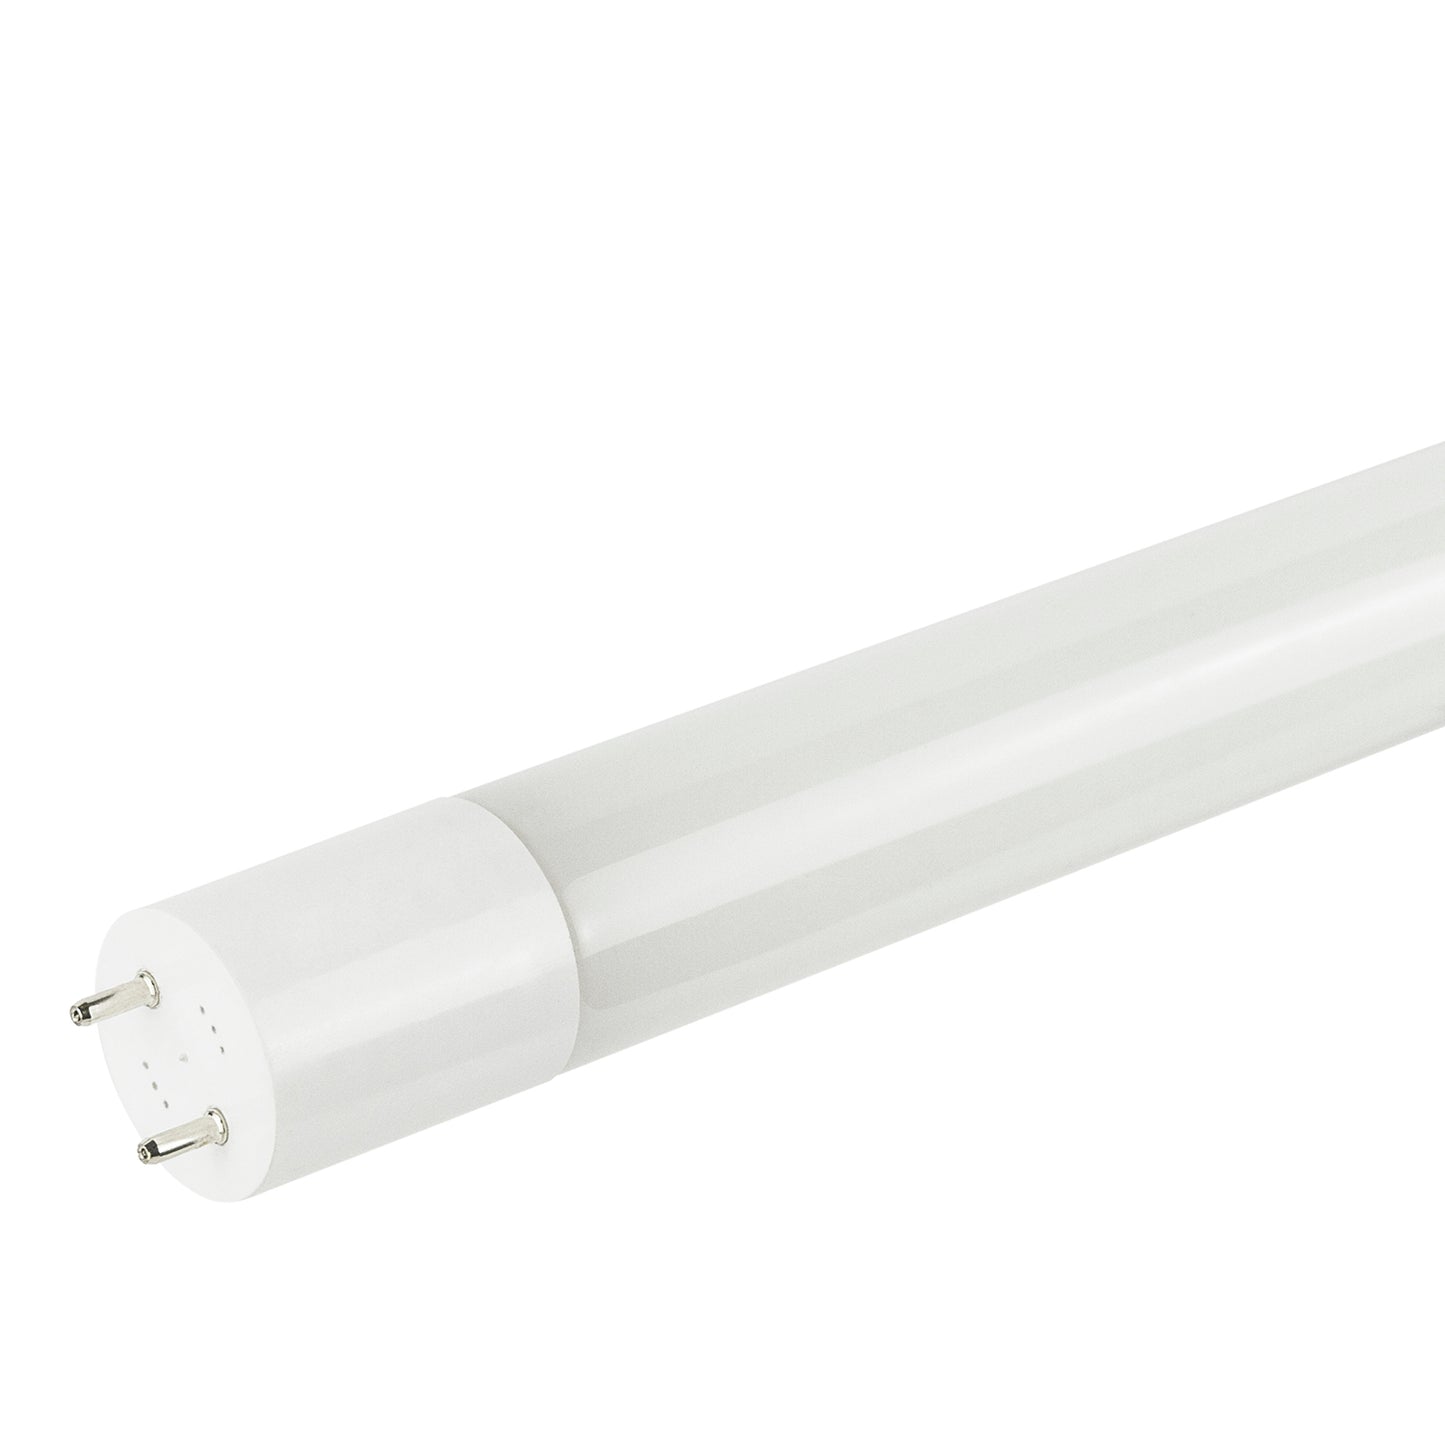 Sunlite 88449 LED T8 Ballast Bypass Light Tube (Type B) 4 Foot, 14W (F32T8 Equal), 1800 Lm, Medium G13 Base, Dual End Connection, Frosted, UL Listed, 6500K Daylight, 25 Count